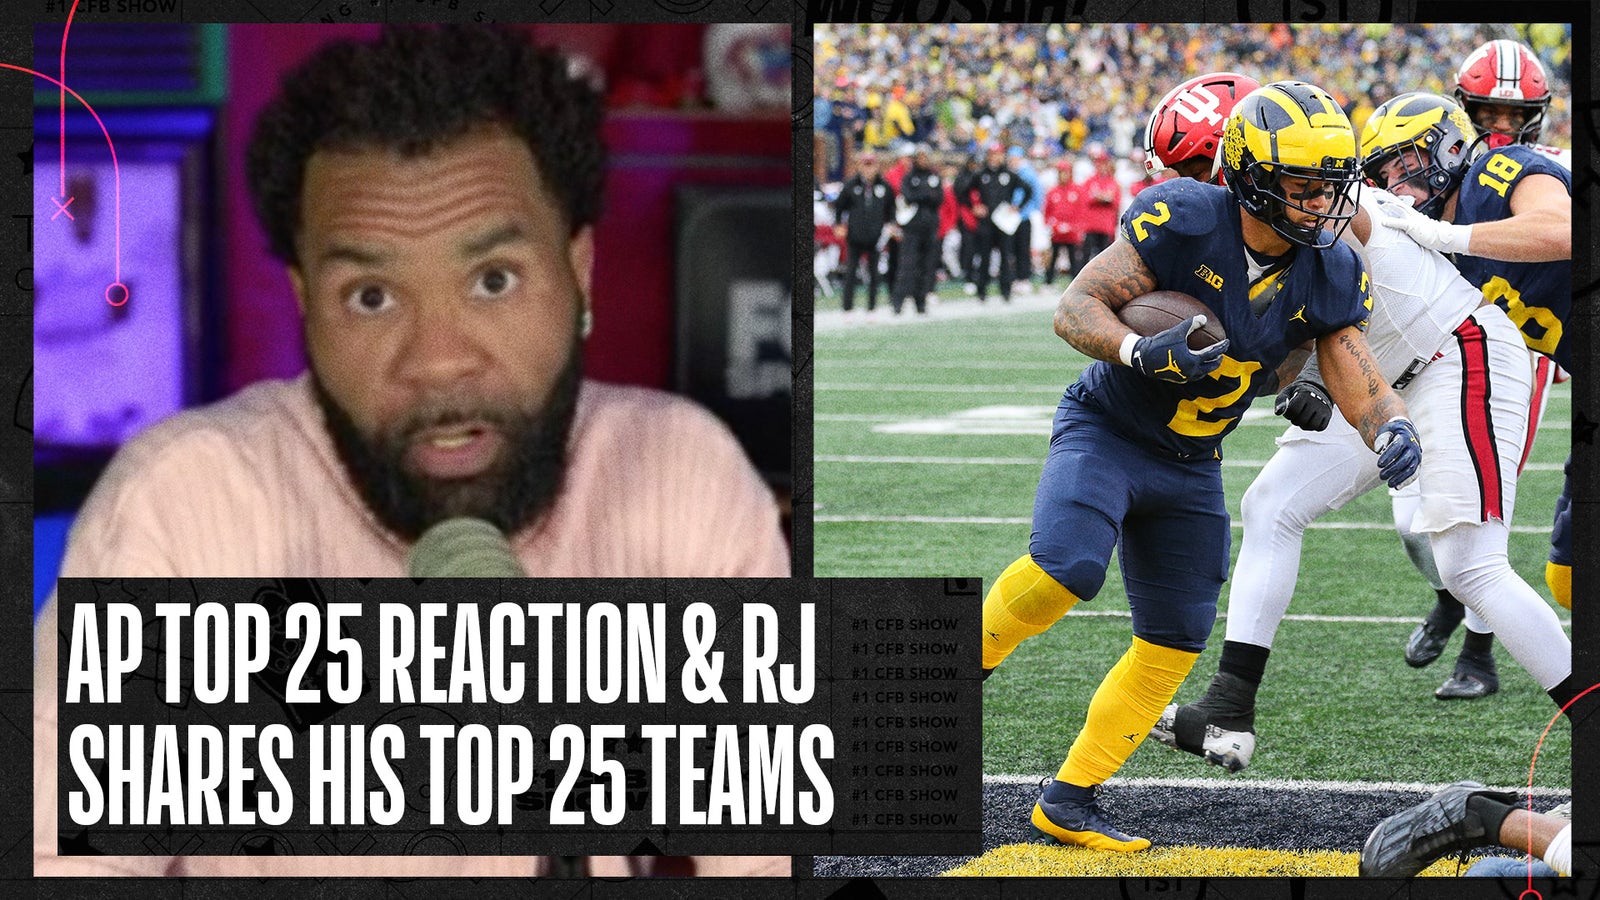 After madness in Week 7, RJ Young reacts to the AP Top 25